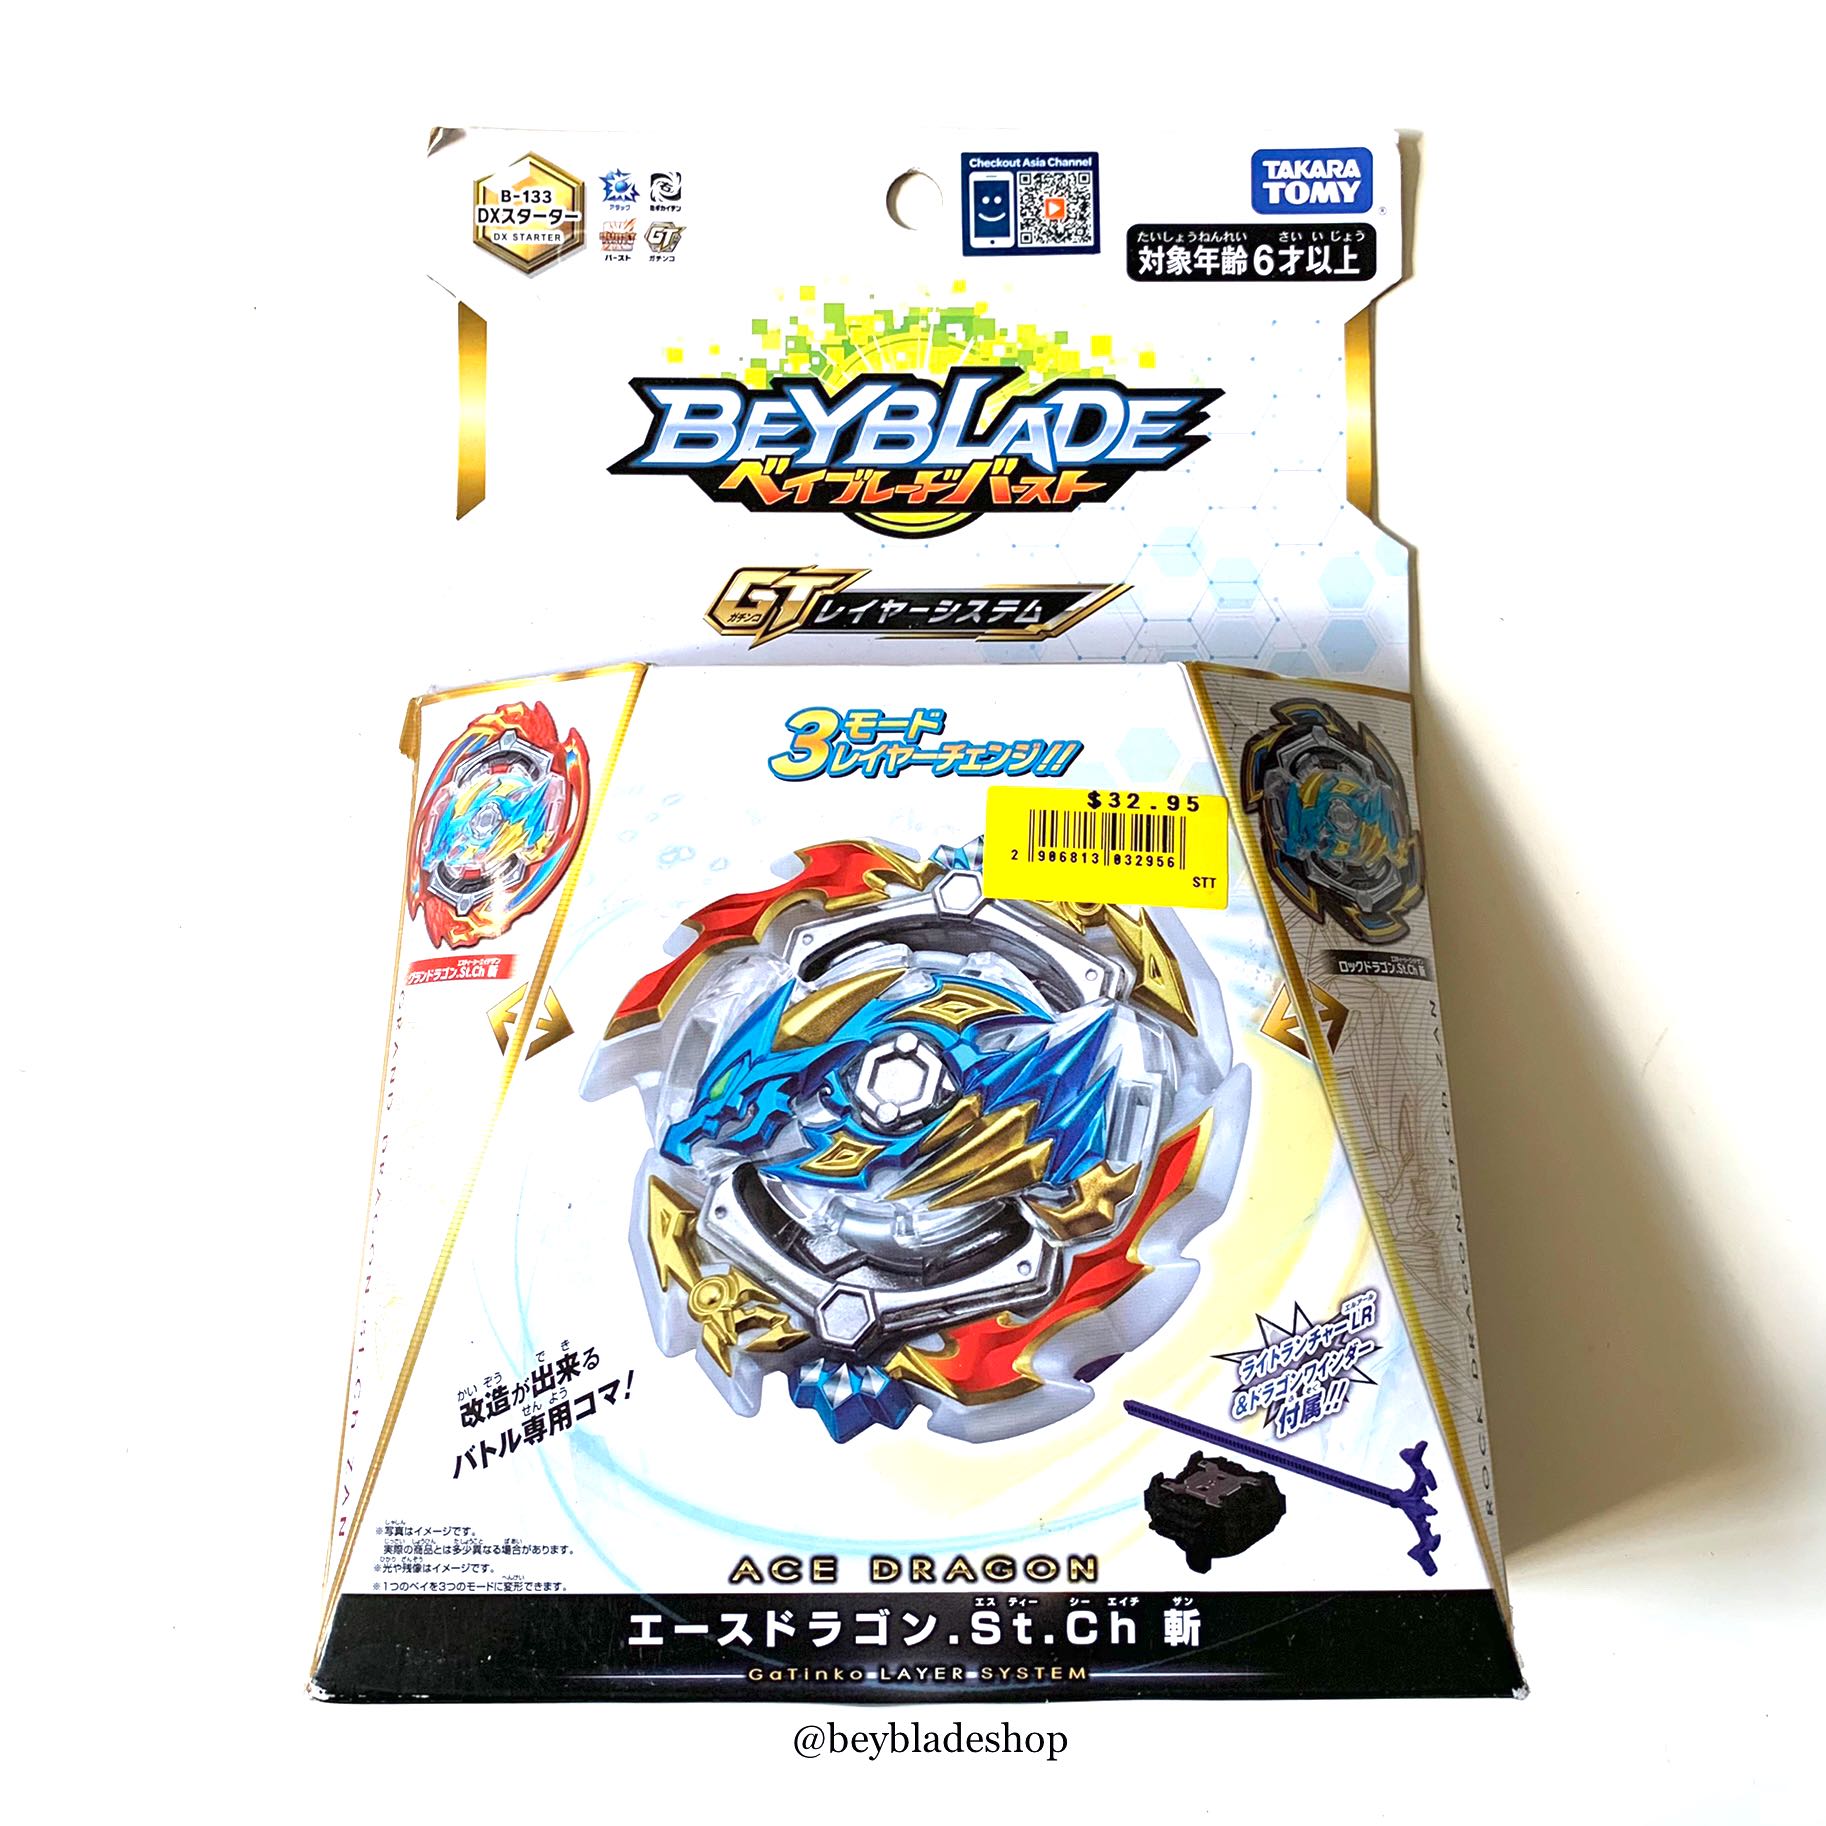 Beyblade Burst Gt Rise Ace Dragon Launcher Hobbies Toys Toys Games On Carousell